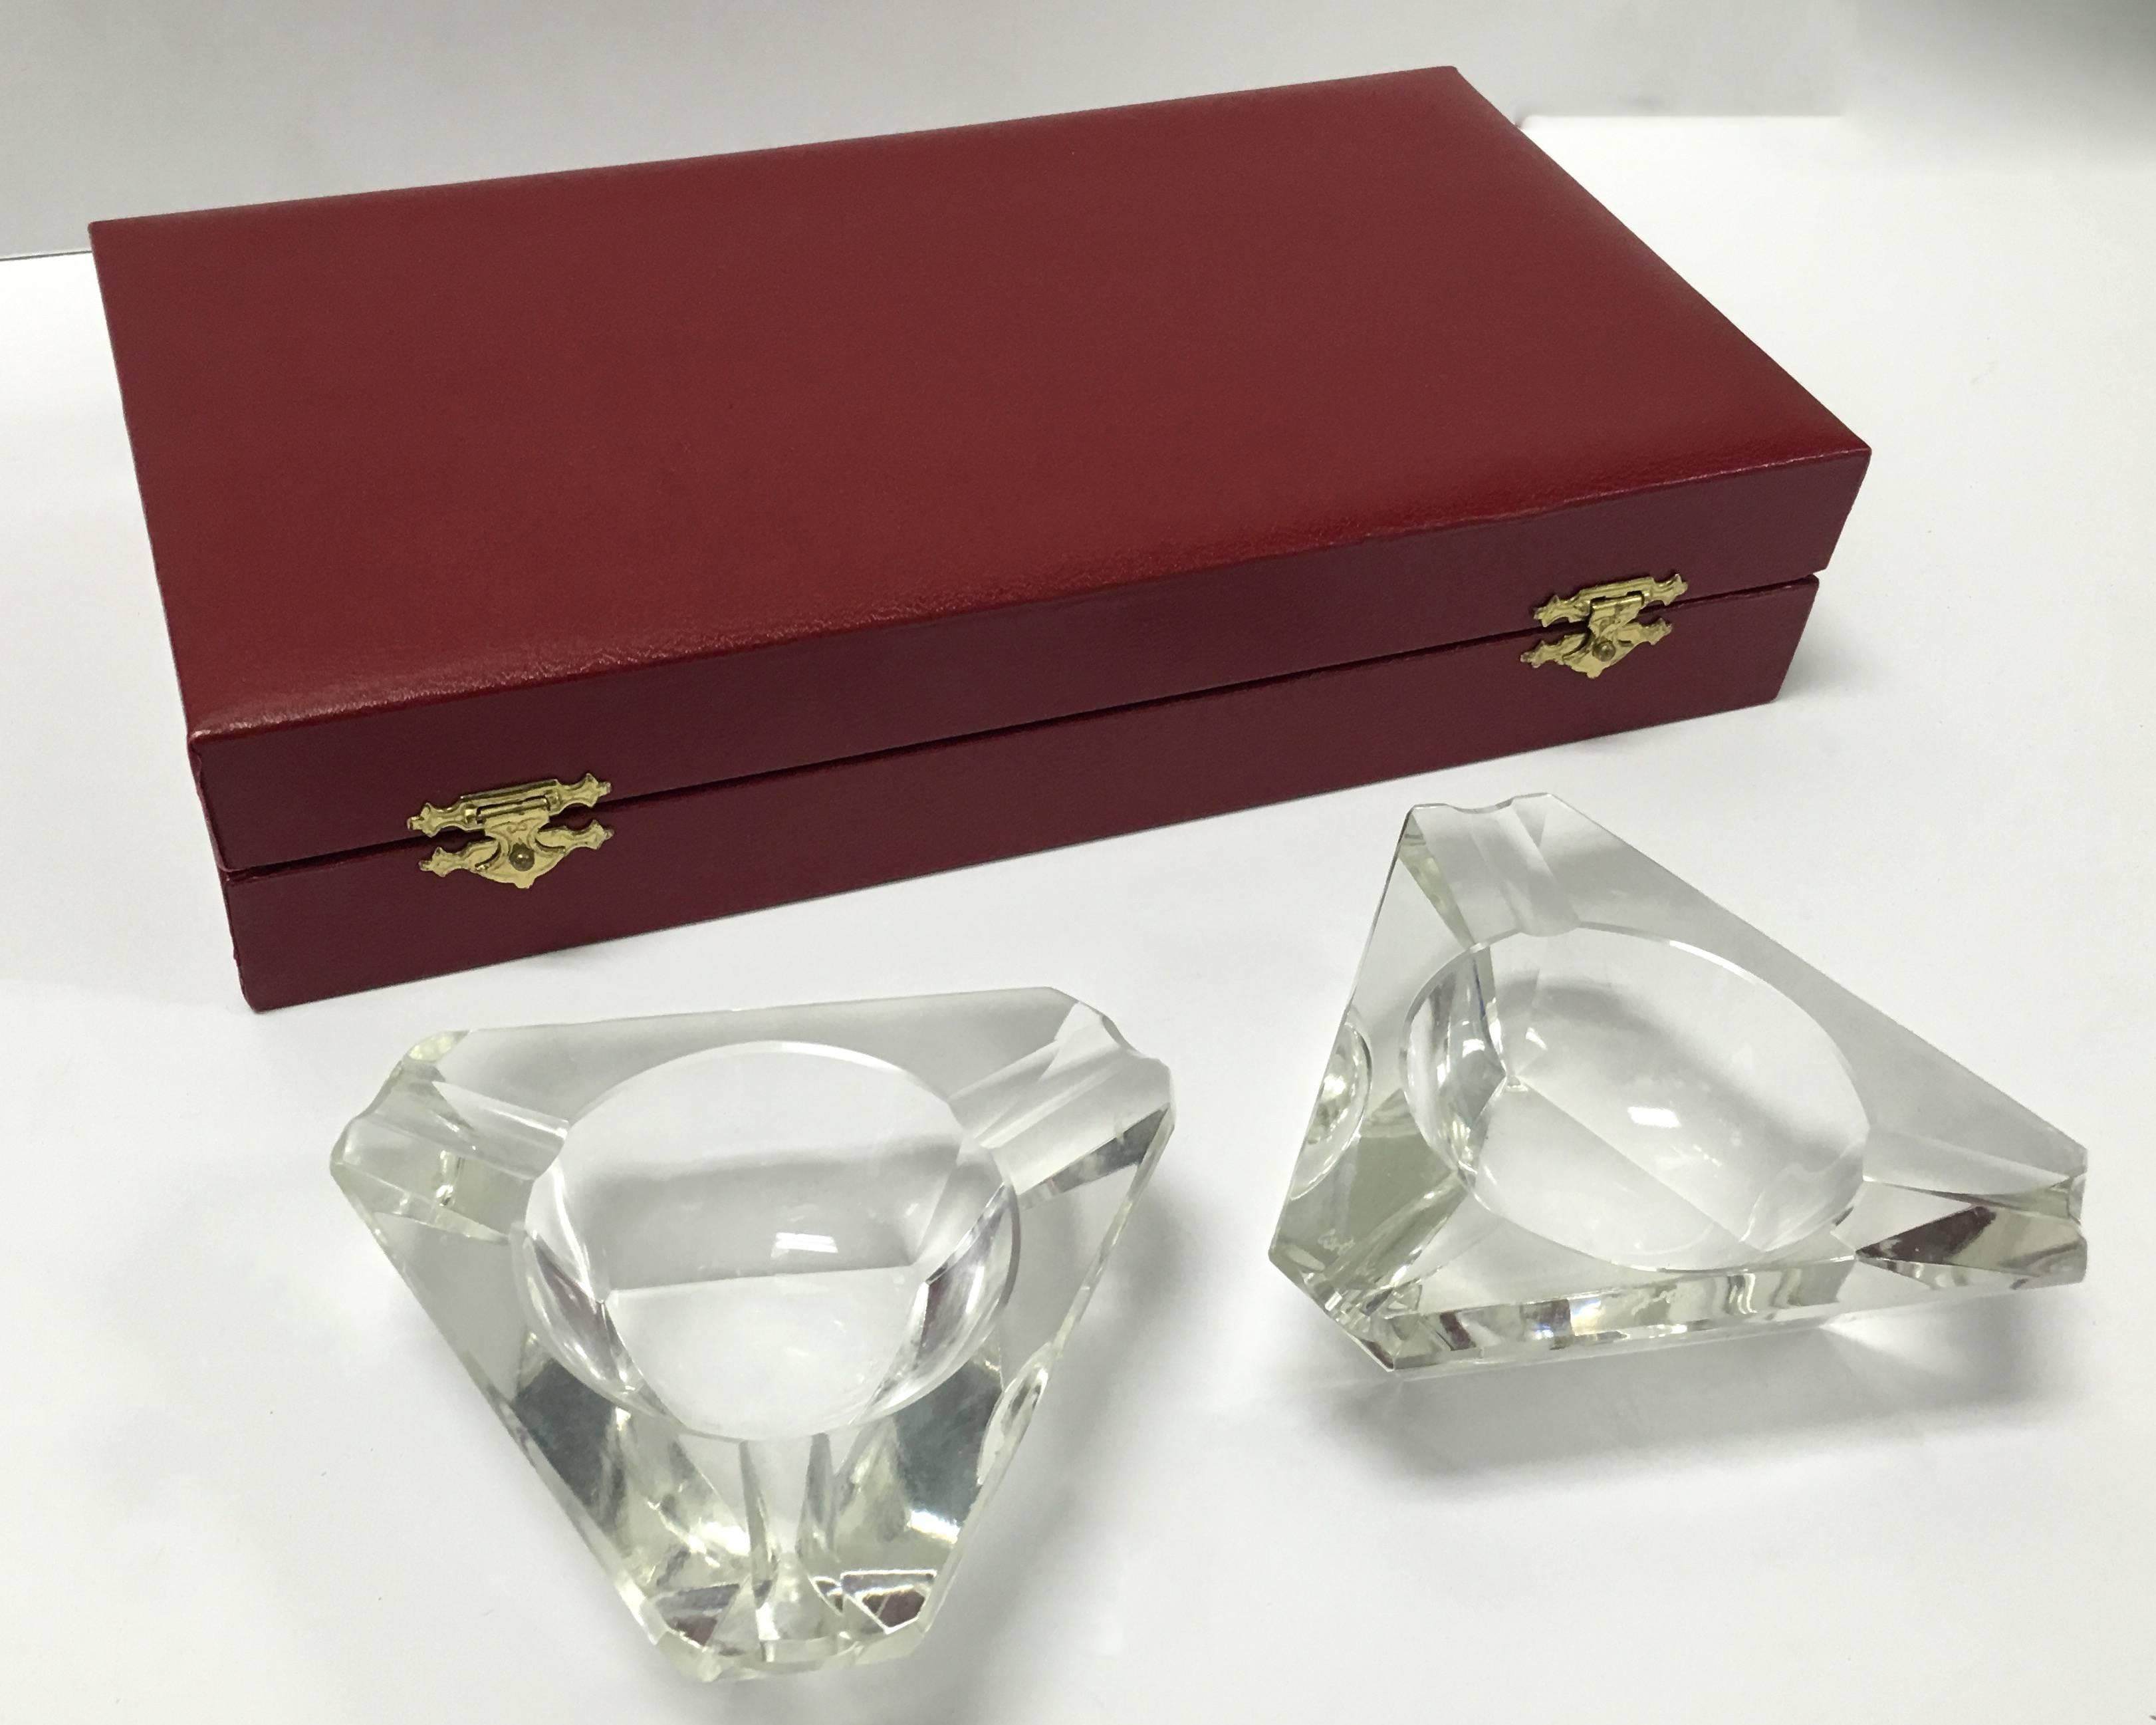 1980s pair of Cartier faceted crystal ashtrays. Original red leather Cartier box is included. Each ashtray is signed Cartier on the bottom.